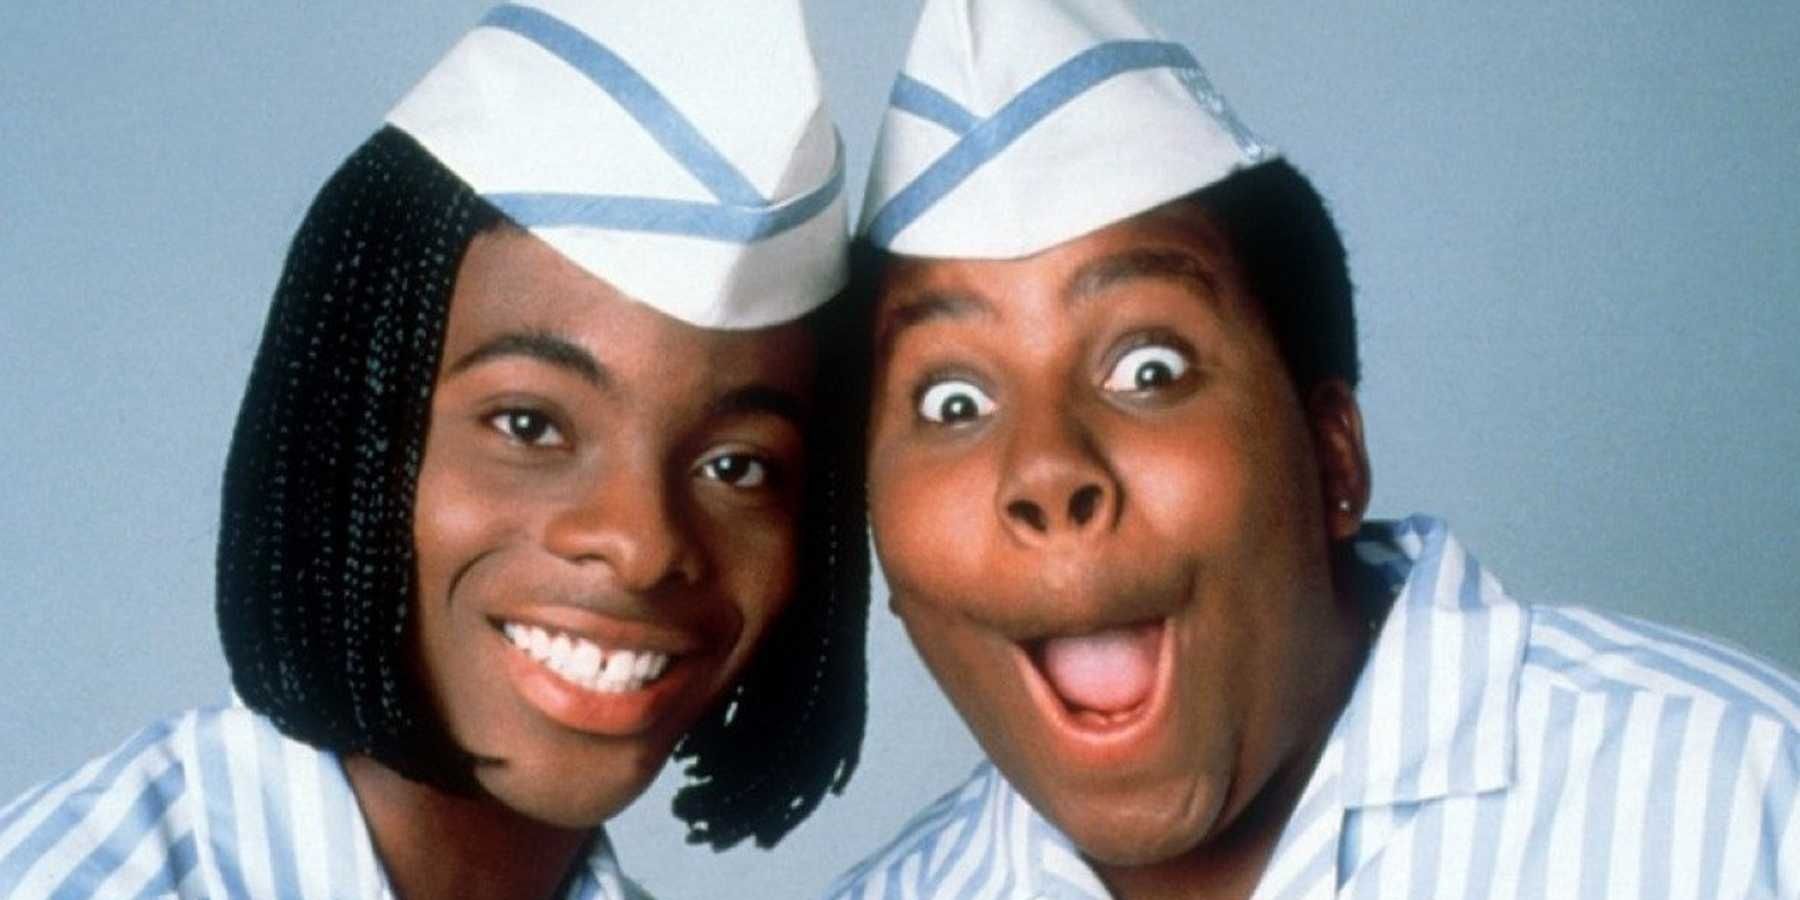 Ed and Dexter smile in a promotional image for Good Burger